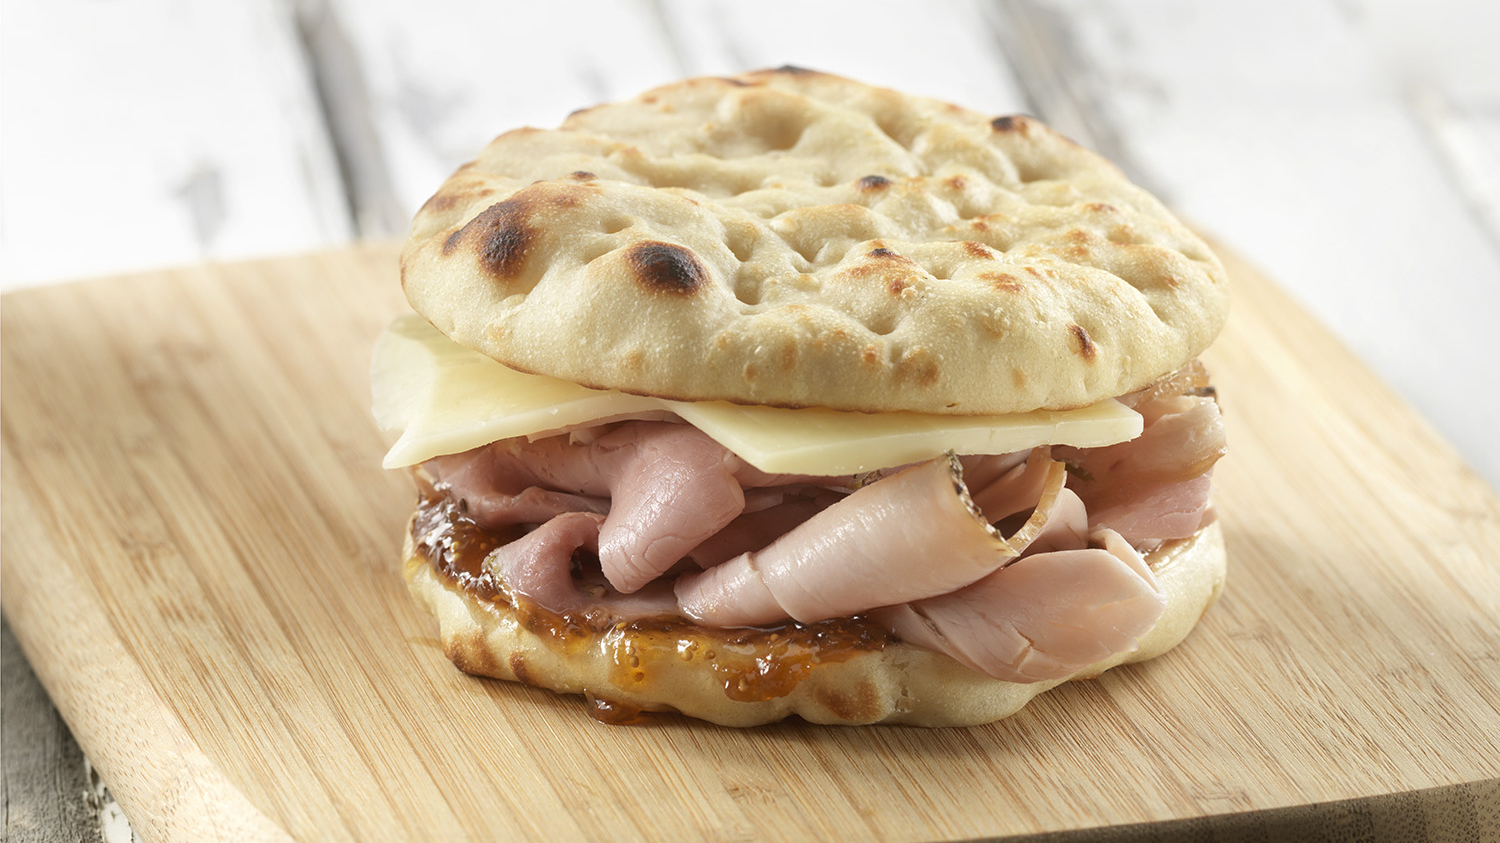 An easy and quick ham and cheese sandwich with Stonefire Original Naan Rounds